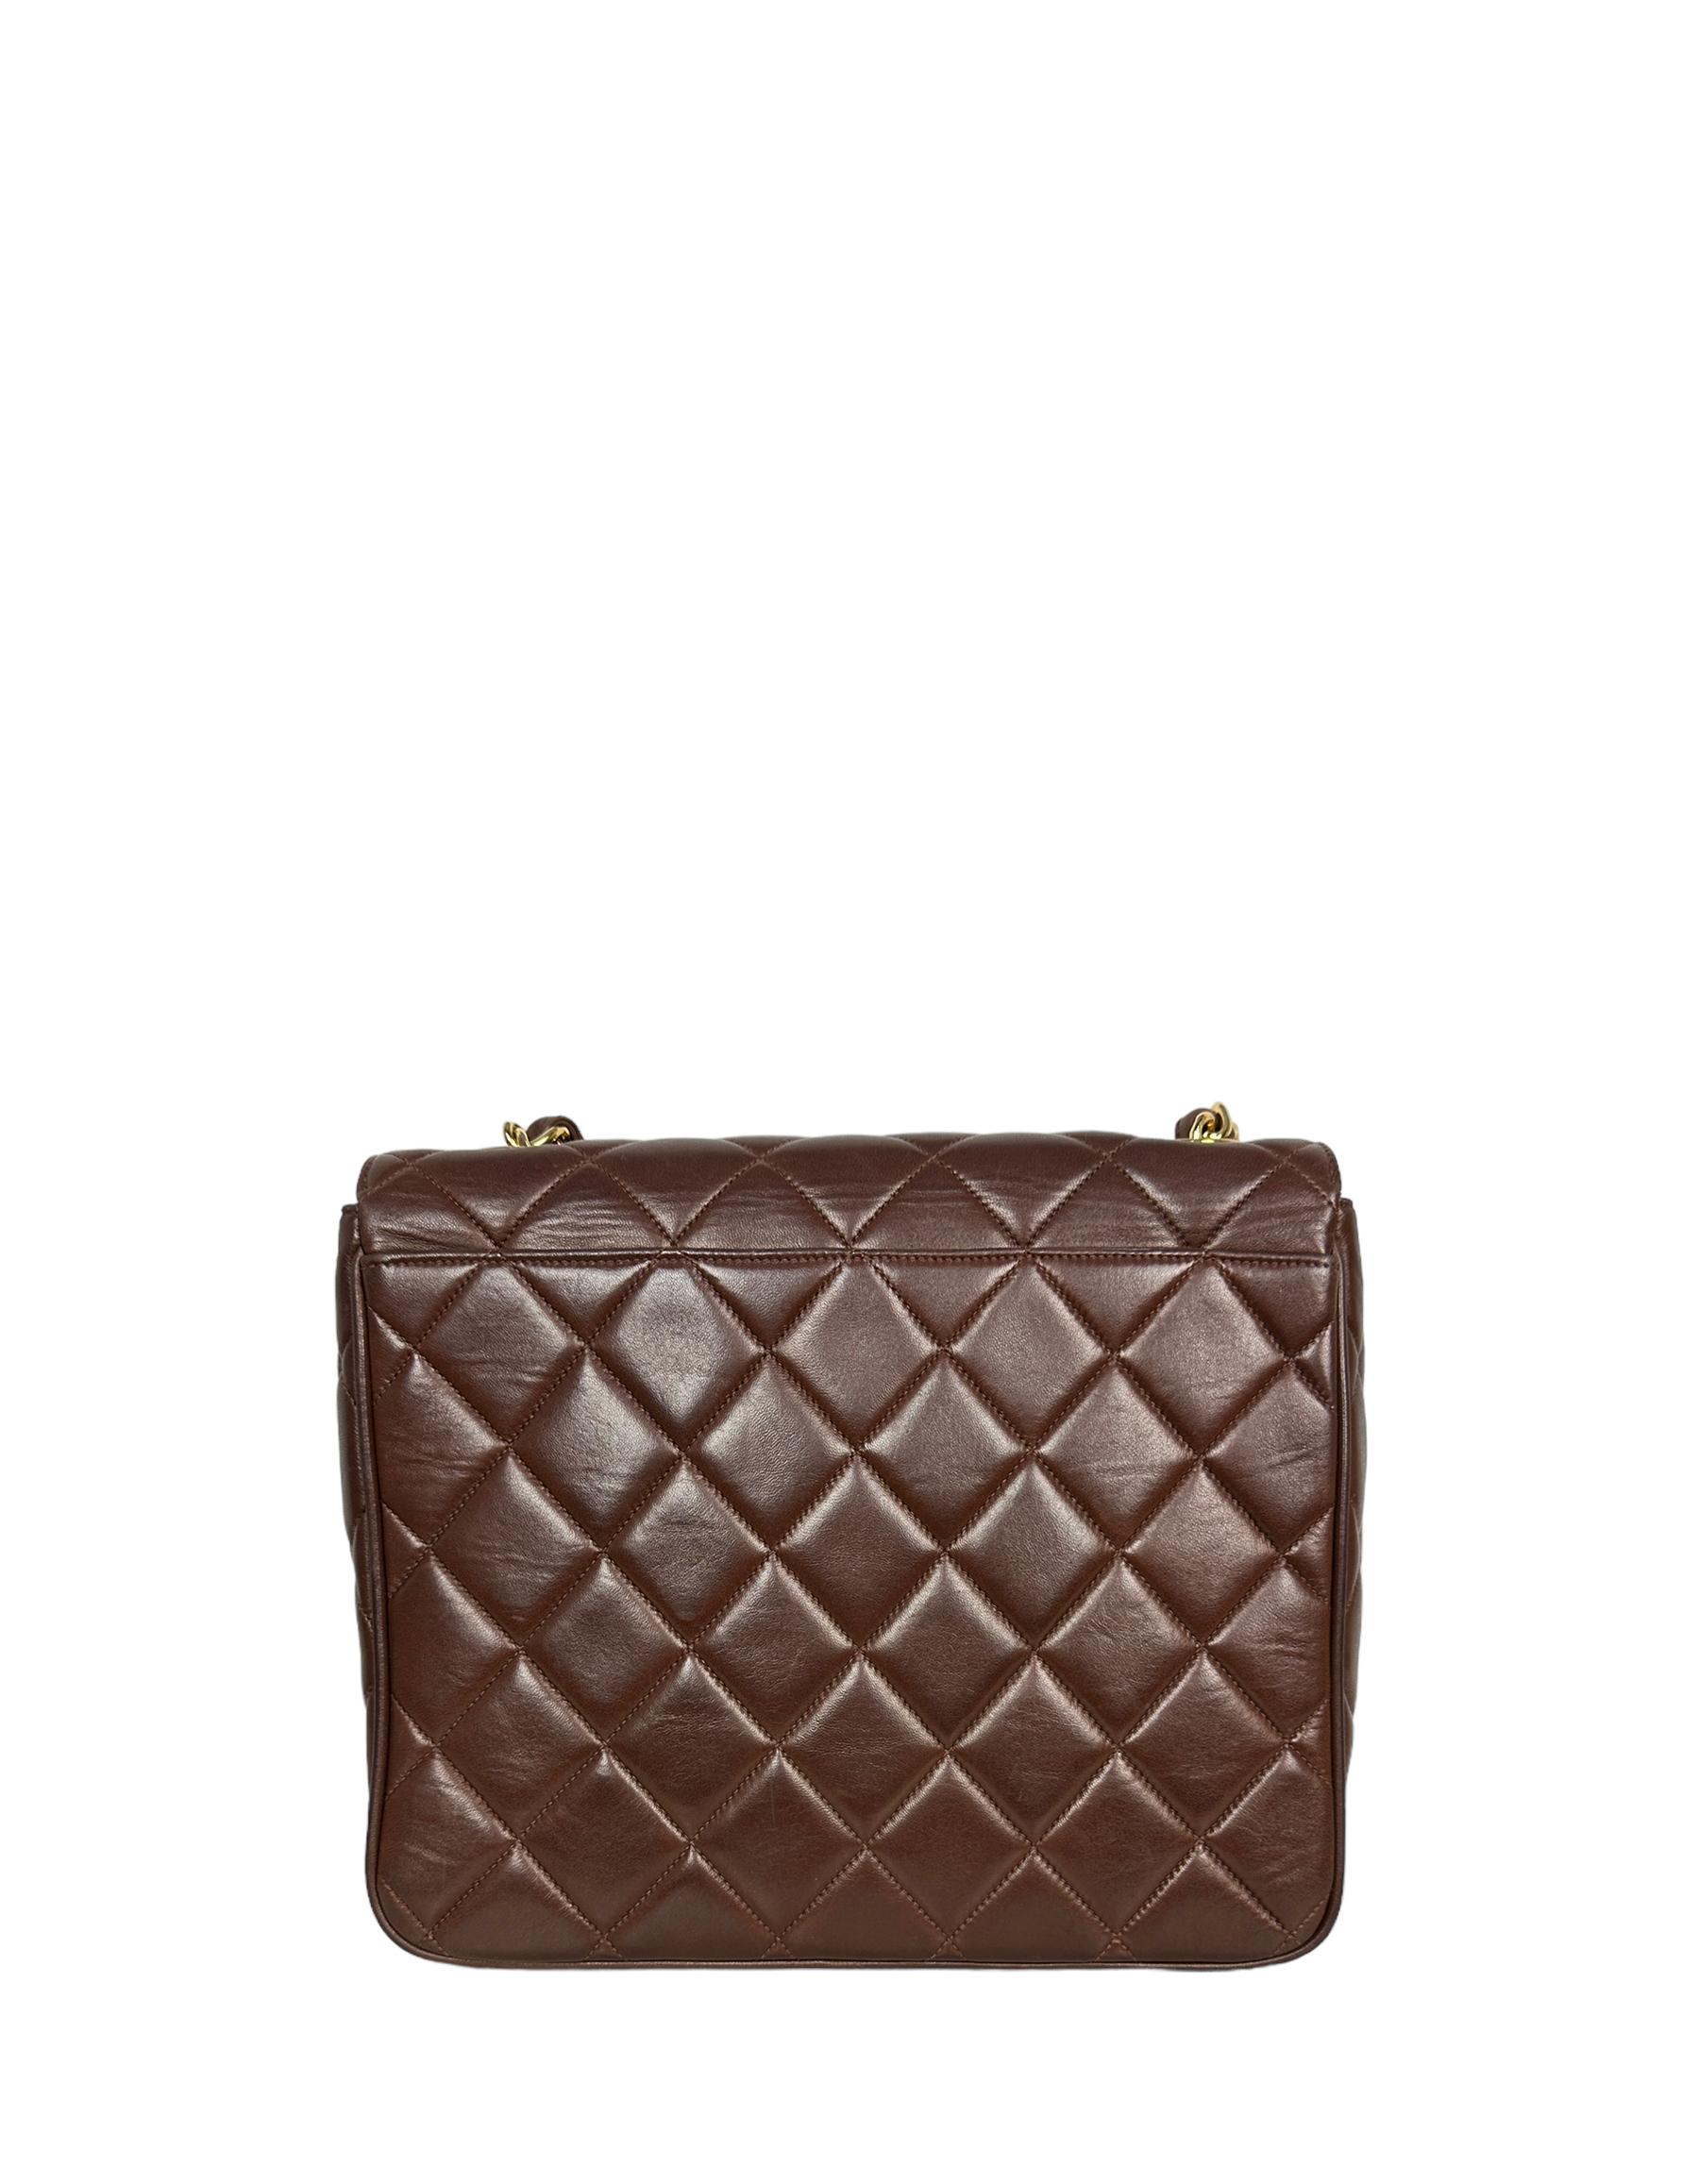 Chanel 1990s Brown Lambskin Leather CC Maxi Flap Messenger Bag In Good Condition In New York, NY